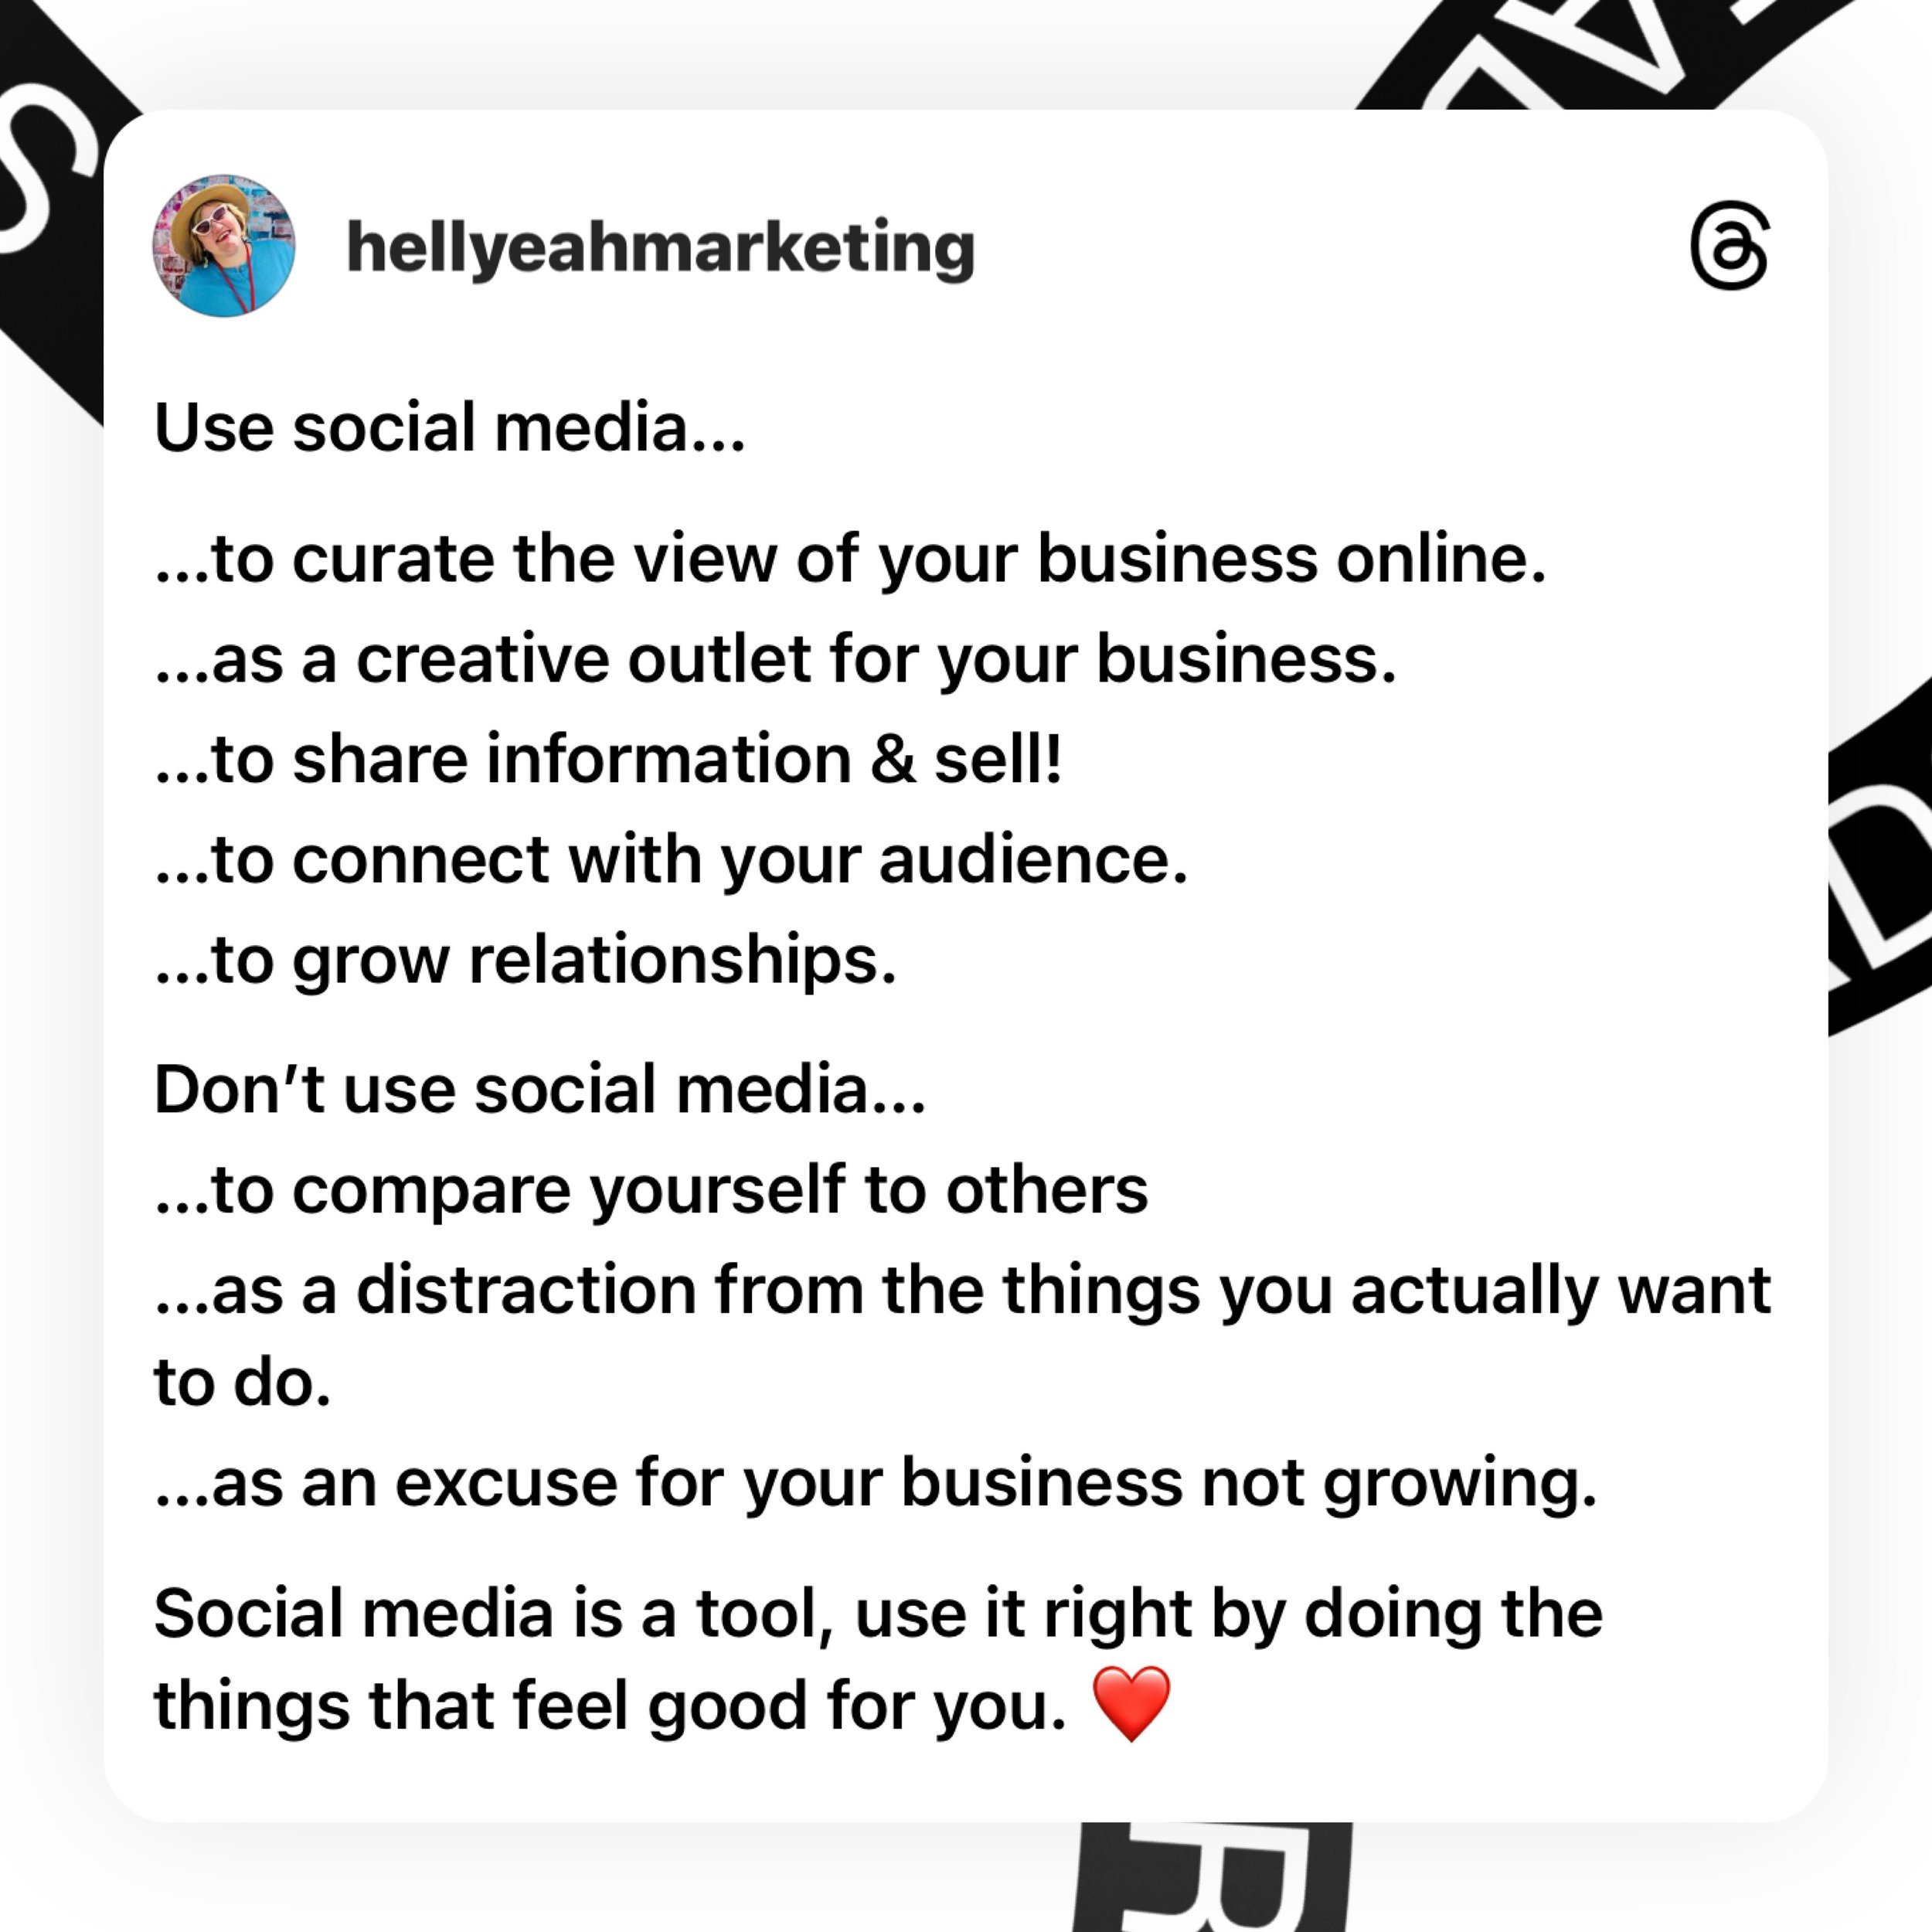 Start by creating the content you want and see how it goes! ✨